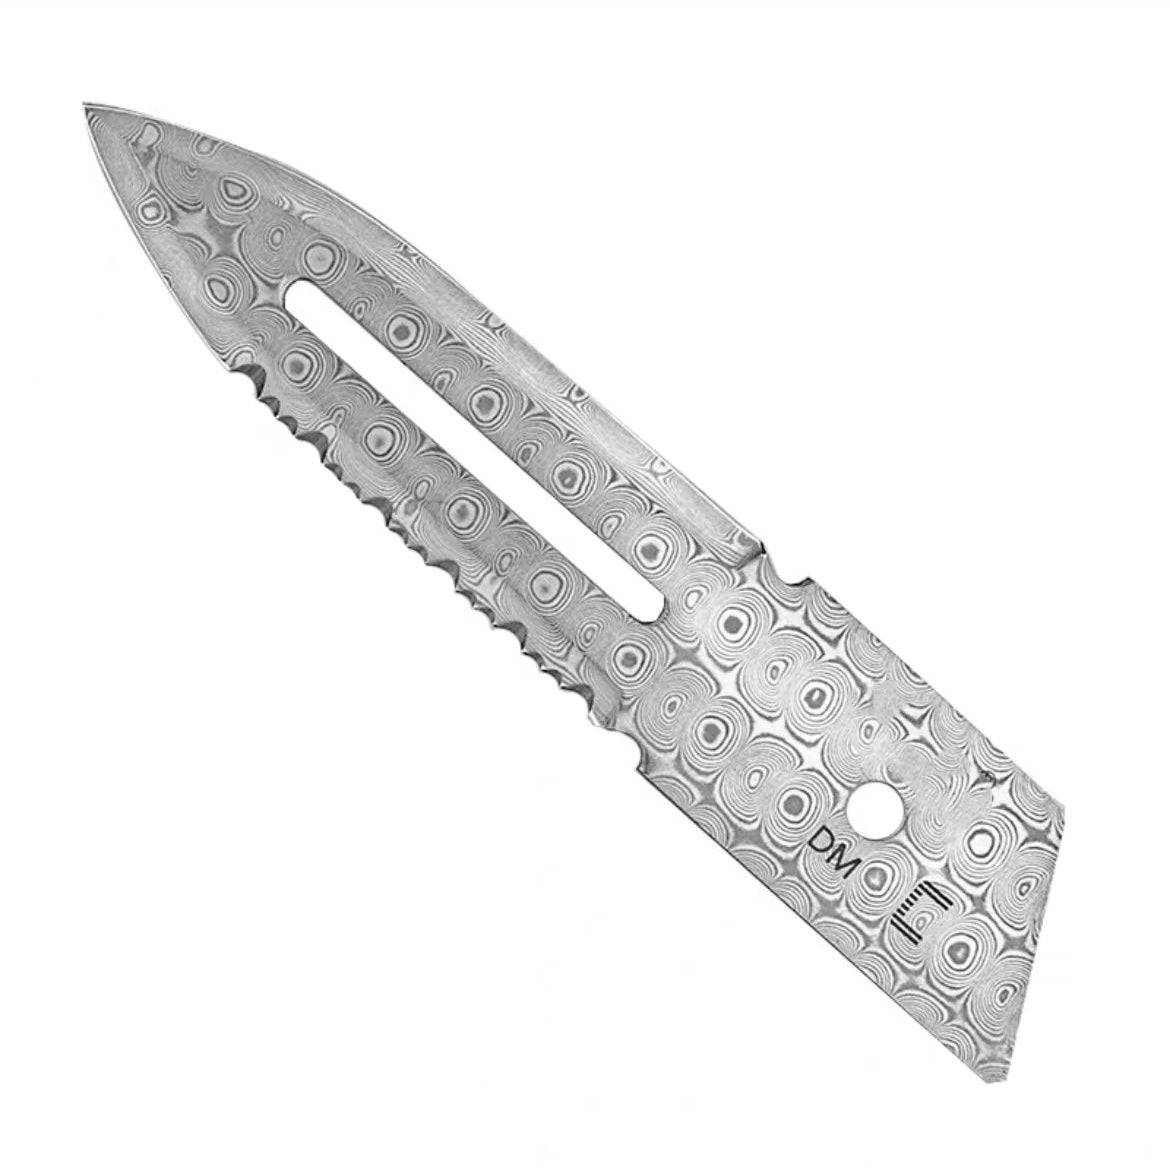 Products – Zyac knives